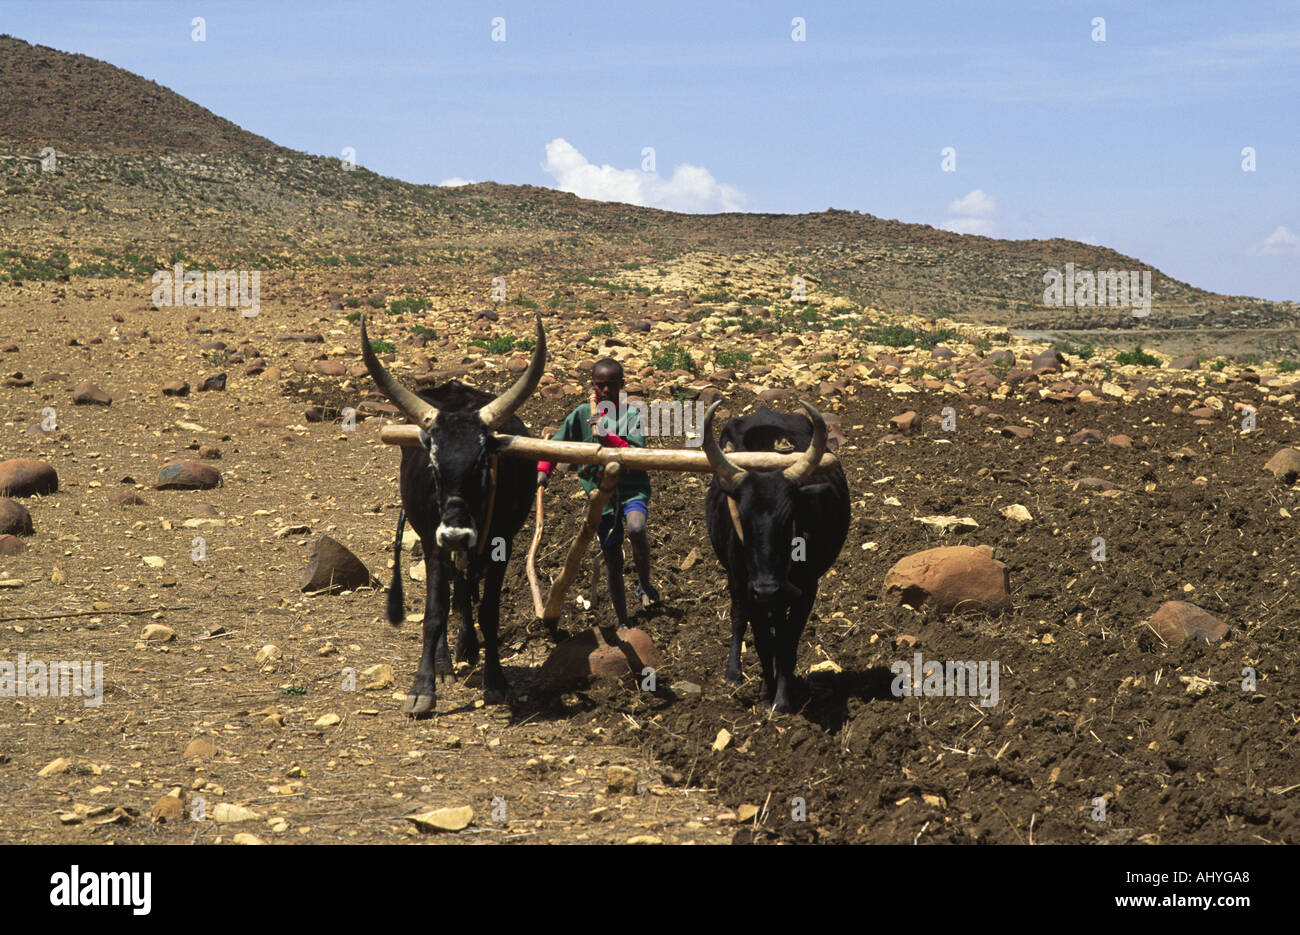 Young boy ploughing a stony hillside with oxen in northern Ethiopia Stock Photo